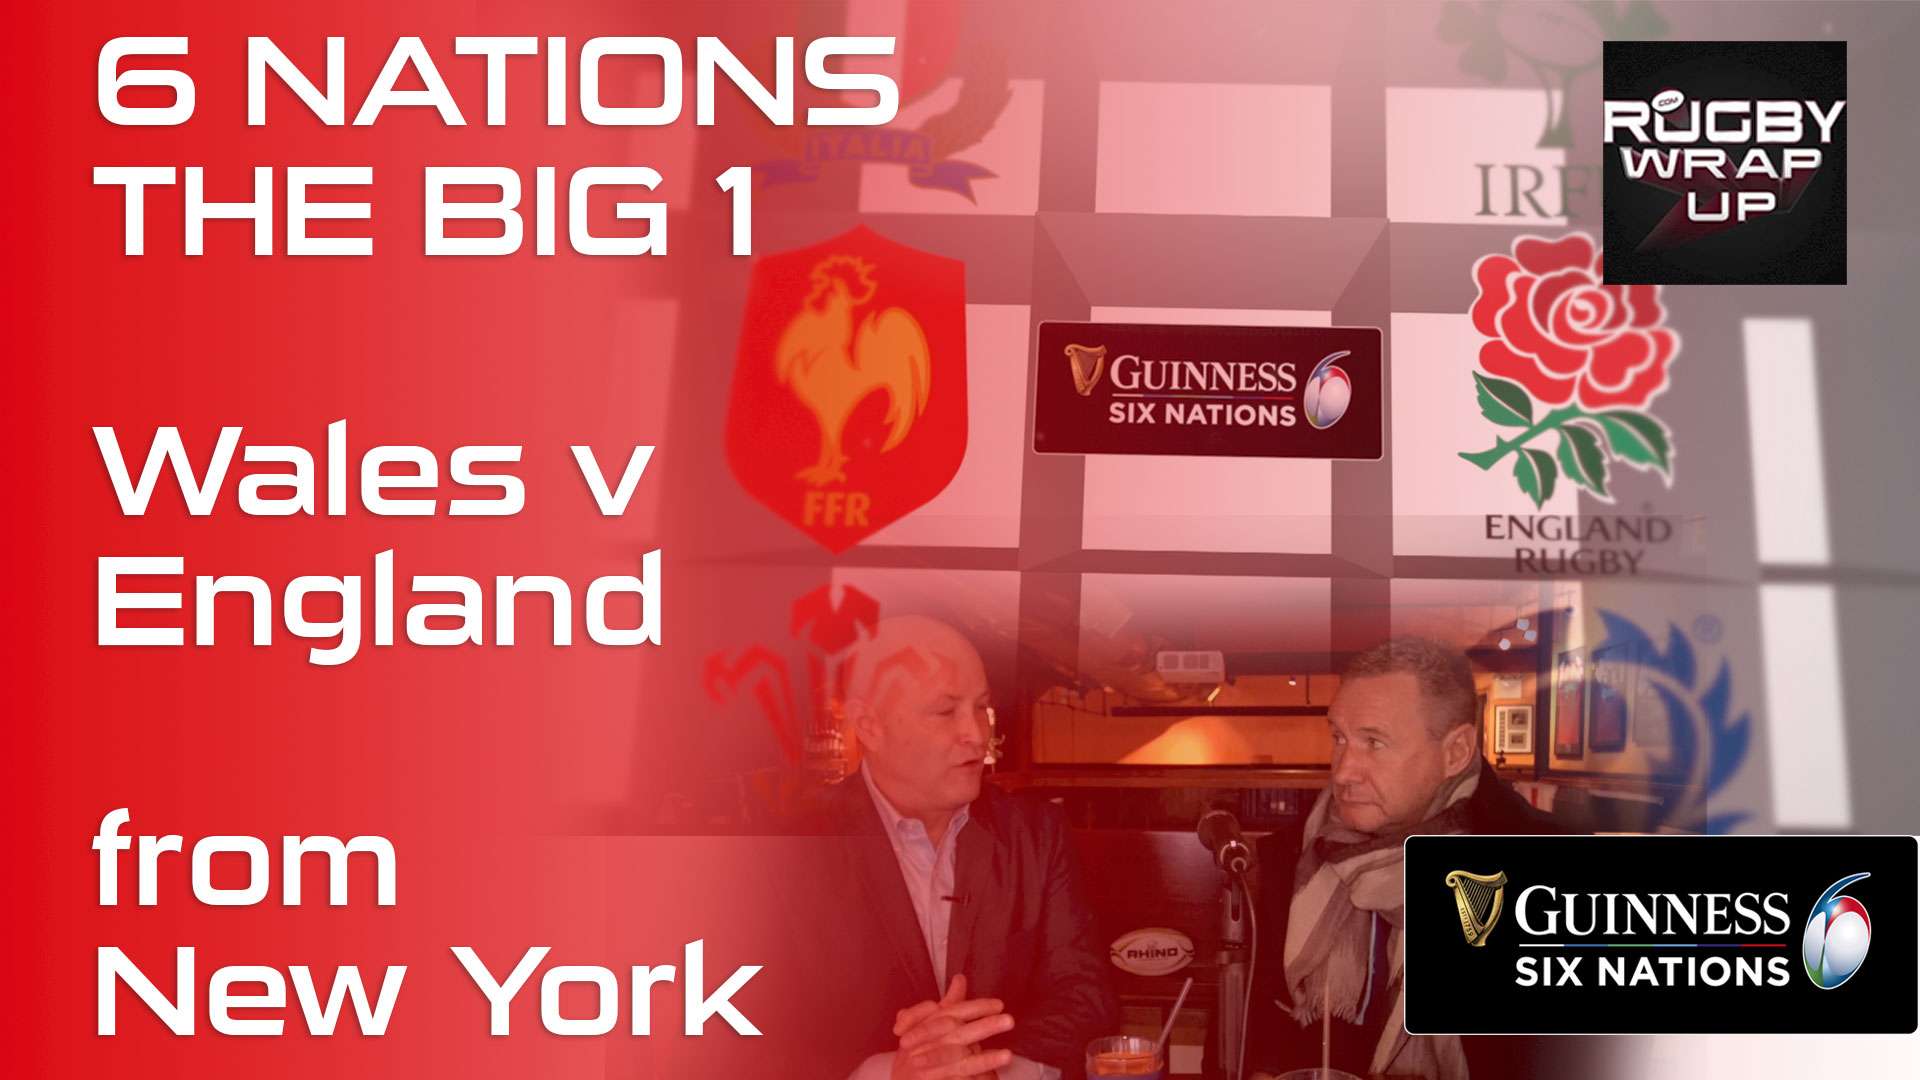 Six Nations Recap & Opinion from World's Best Rugby Pub, RUGBY_WRAP_UP